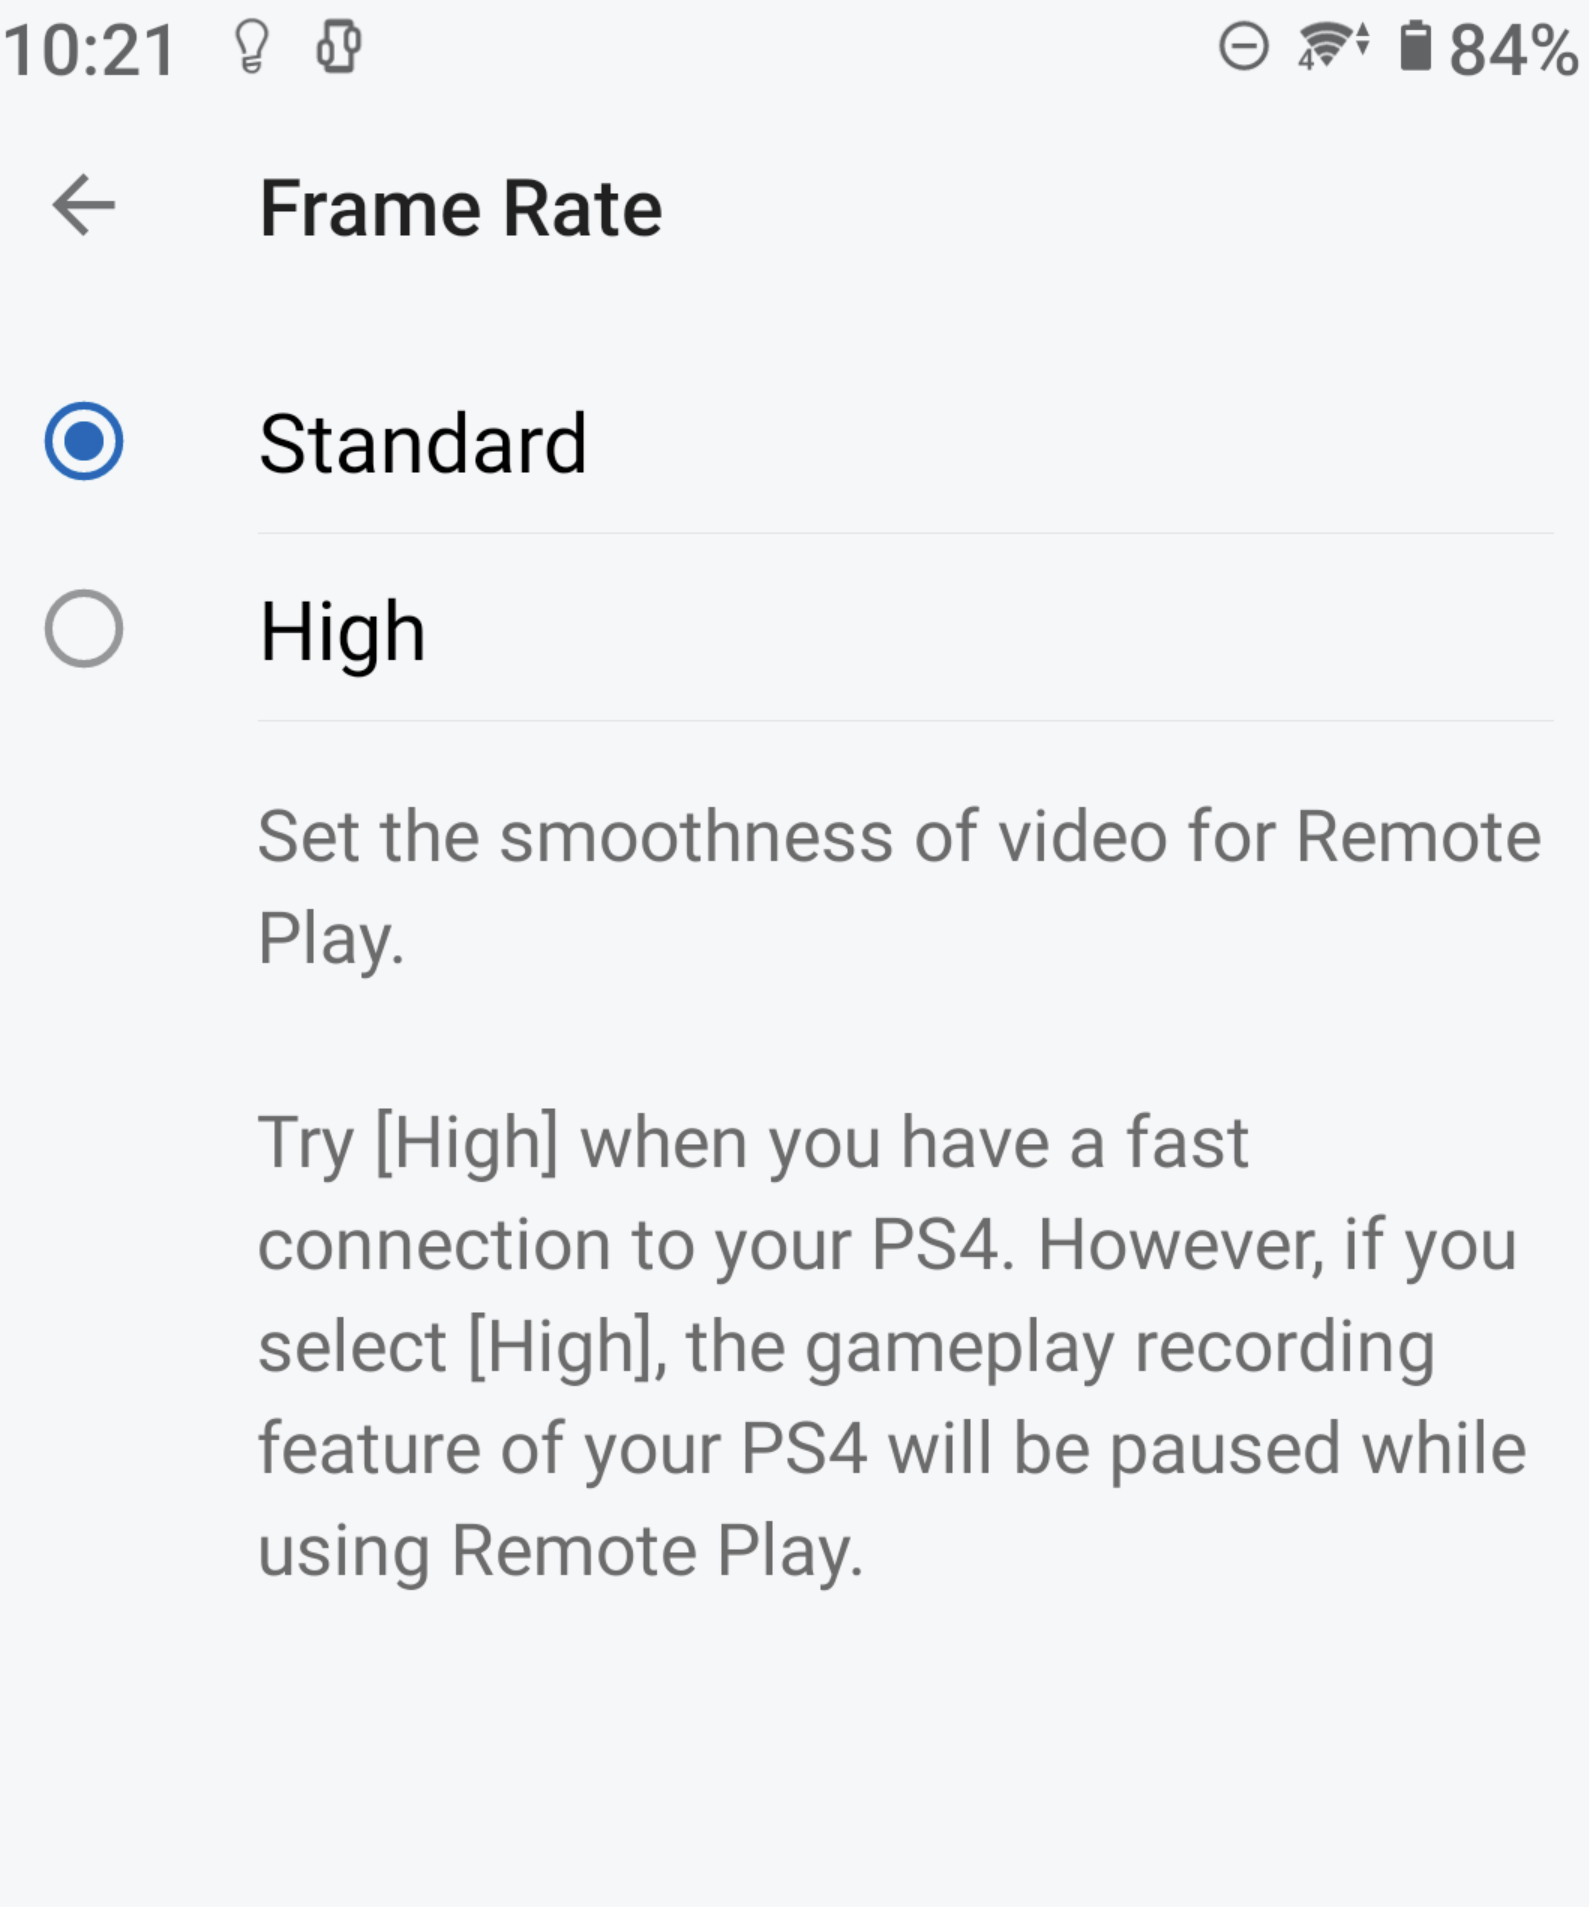 ps4 remote play optimization